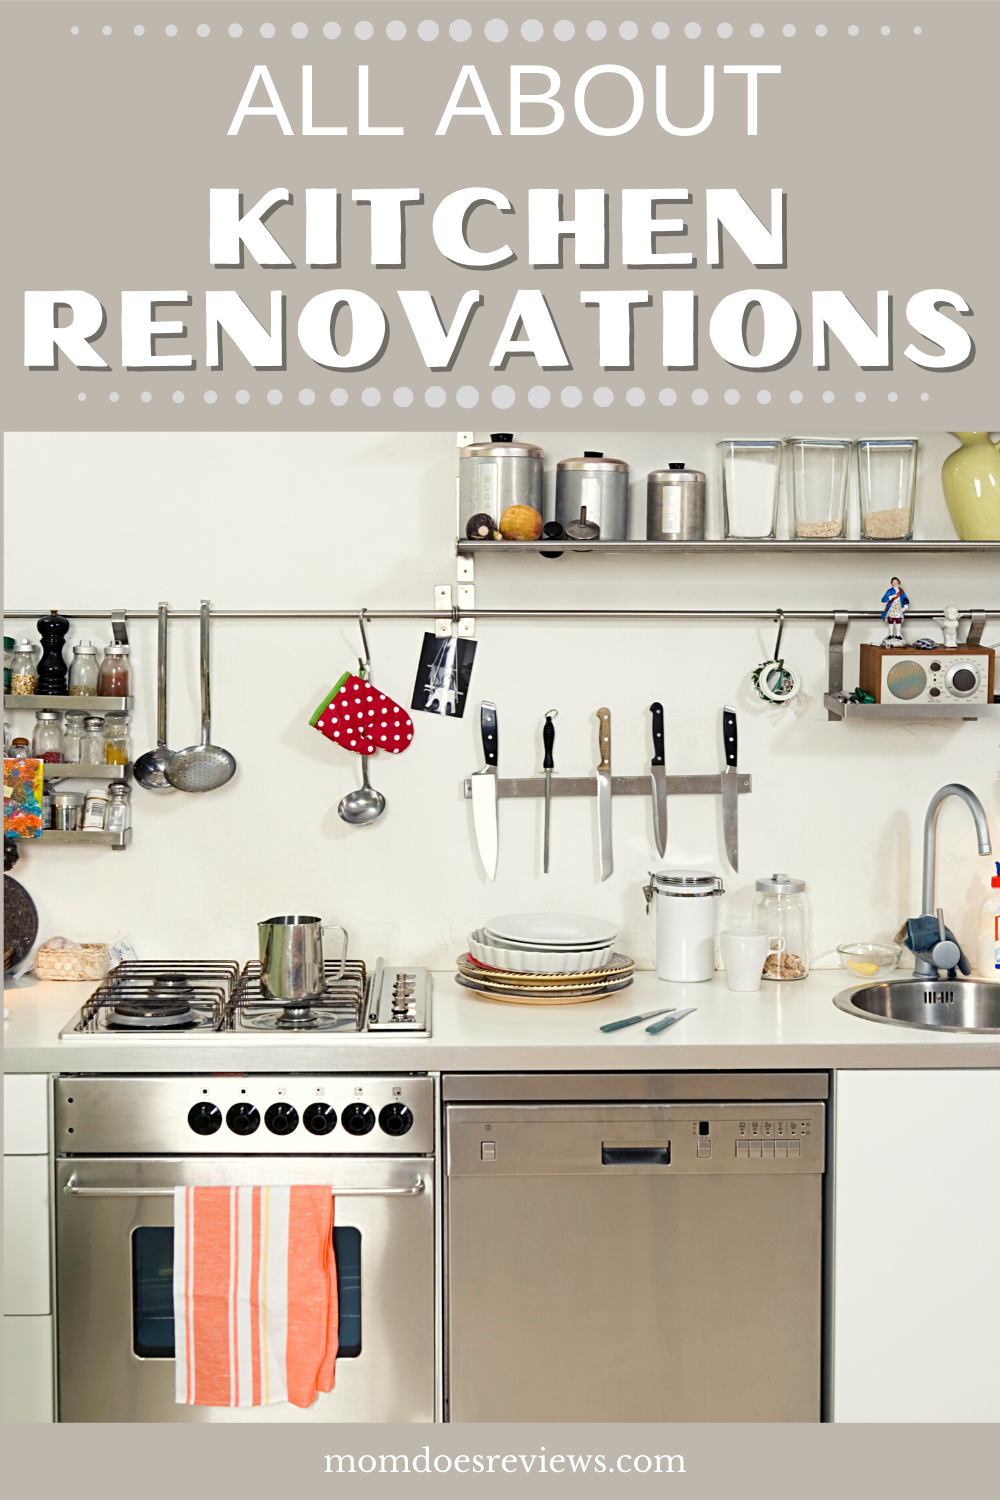 Tips for a Good Quality Kitchen Renovation